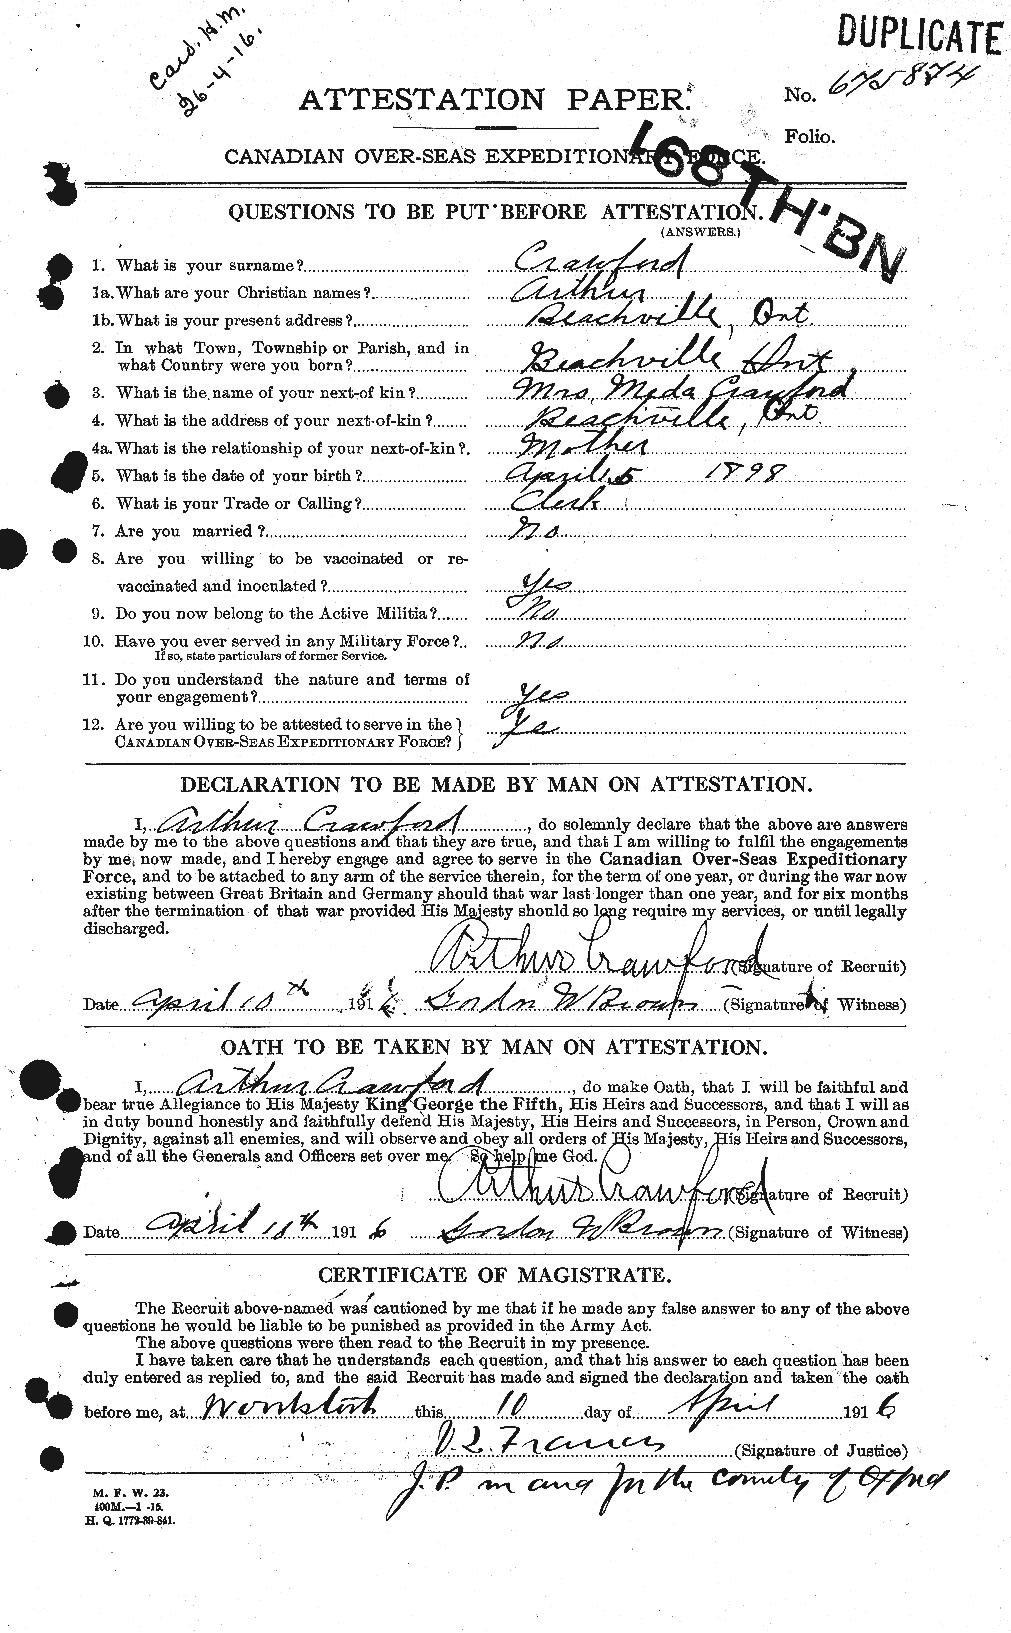 Personnel Records of the First World War - CEF 060930a